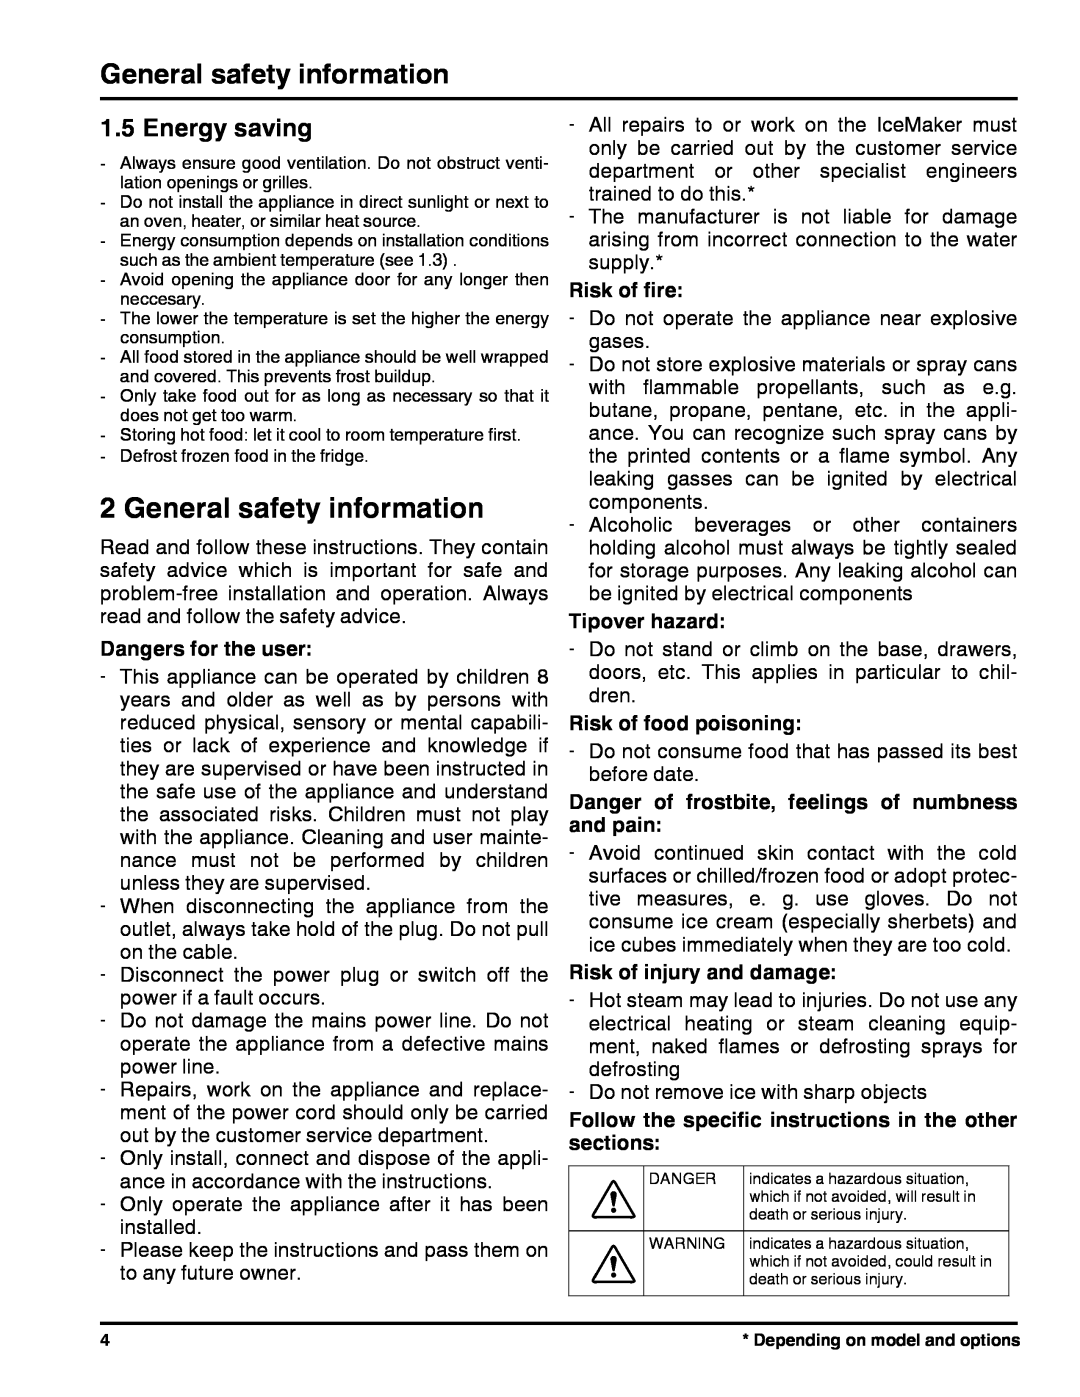 Liebherr HC 1011/1060 HC 1001/1050 121113 7082698 - 00 General safety information, Energy saving, Dangers for the user 